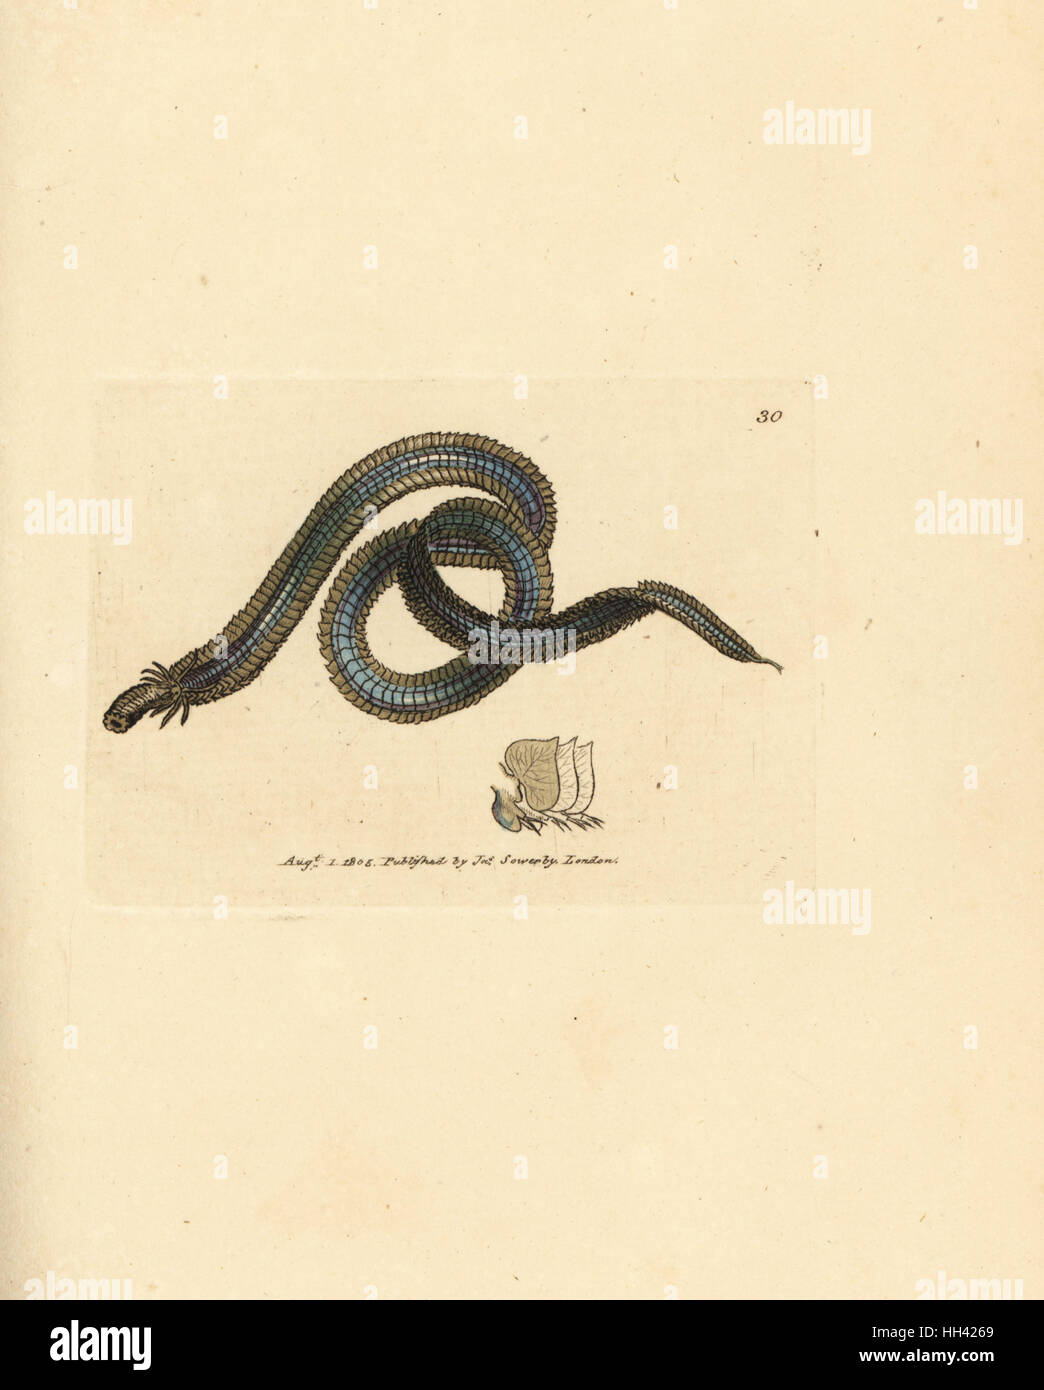 Polychaete worm, Phyllodoce lamelligera (Nereis lamelligera). Handcoloured copperplate engraving by James Sowerby from The British Miscellany, or Coloured figures of new, rare, or little known animal subjects, London, 1804. Stock Photo